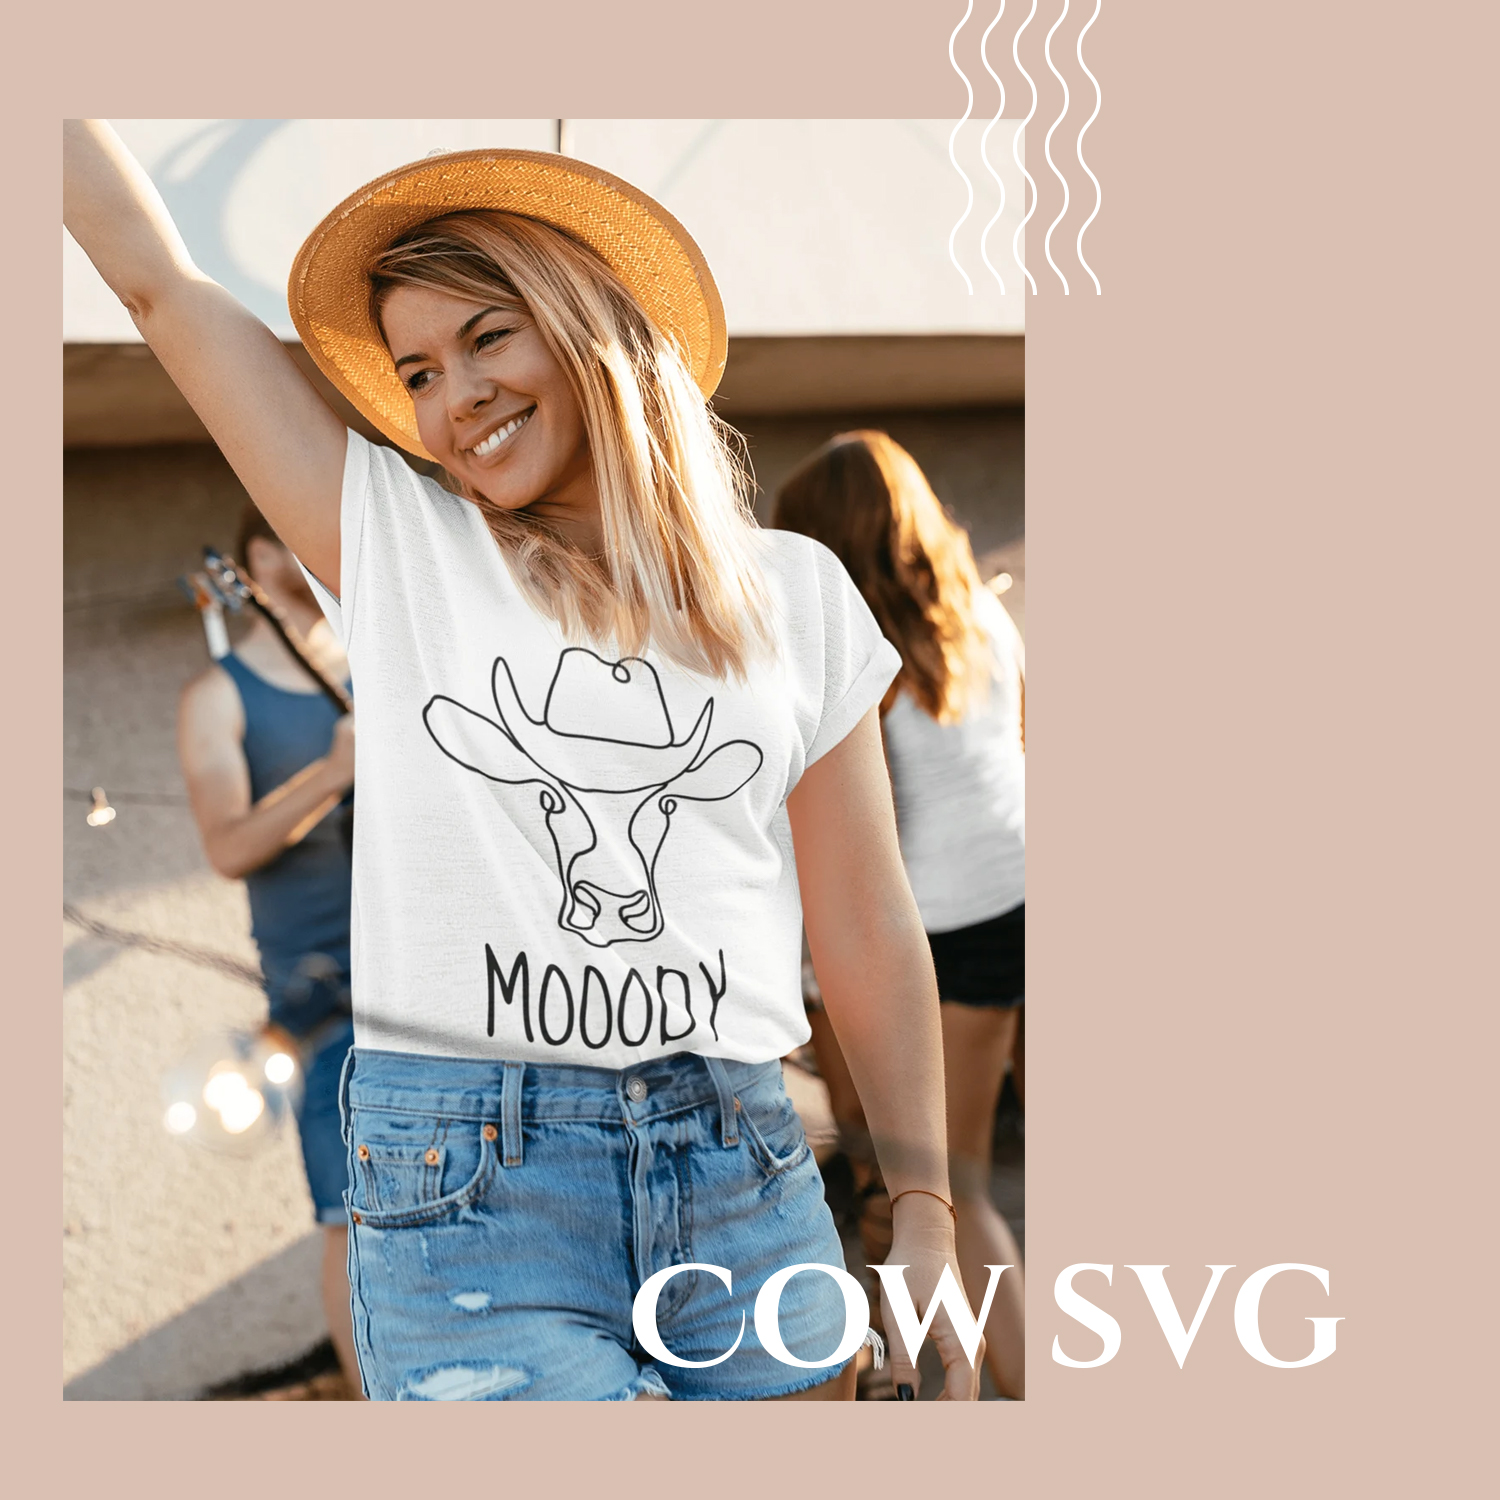 Cow Svg cover.